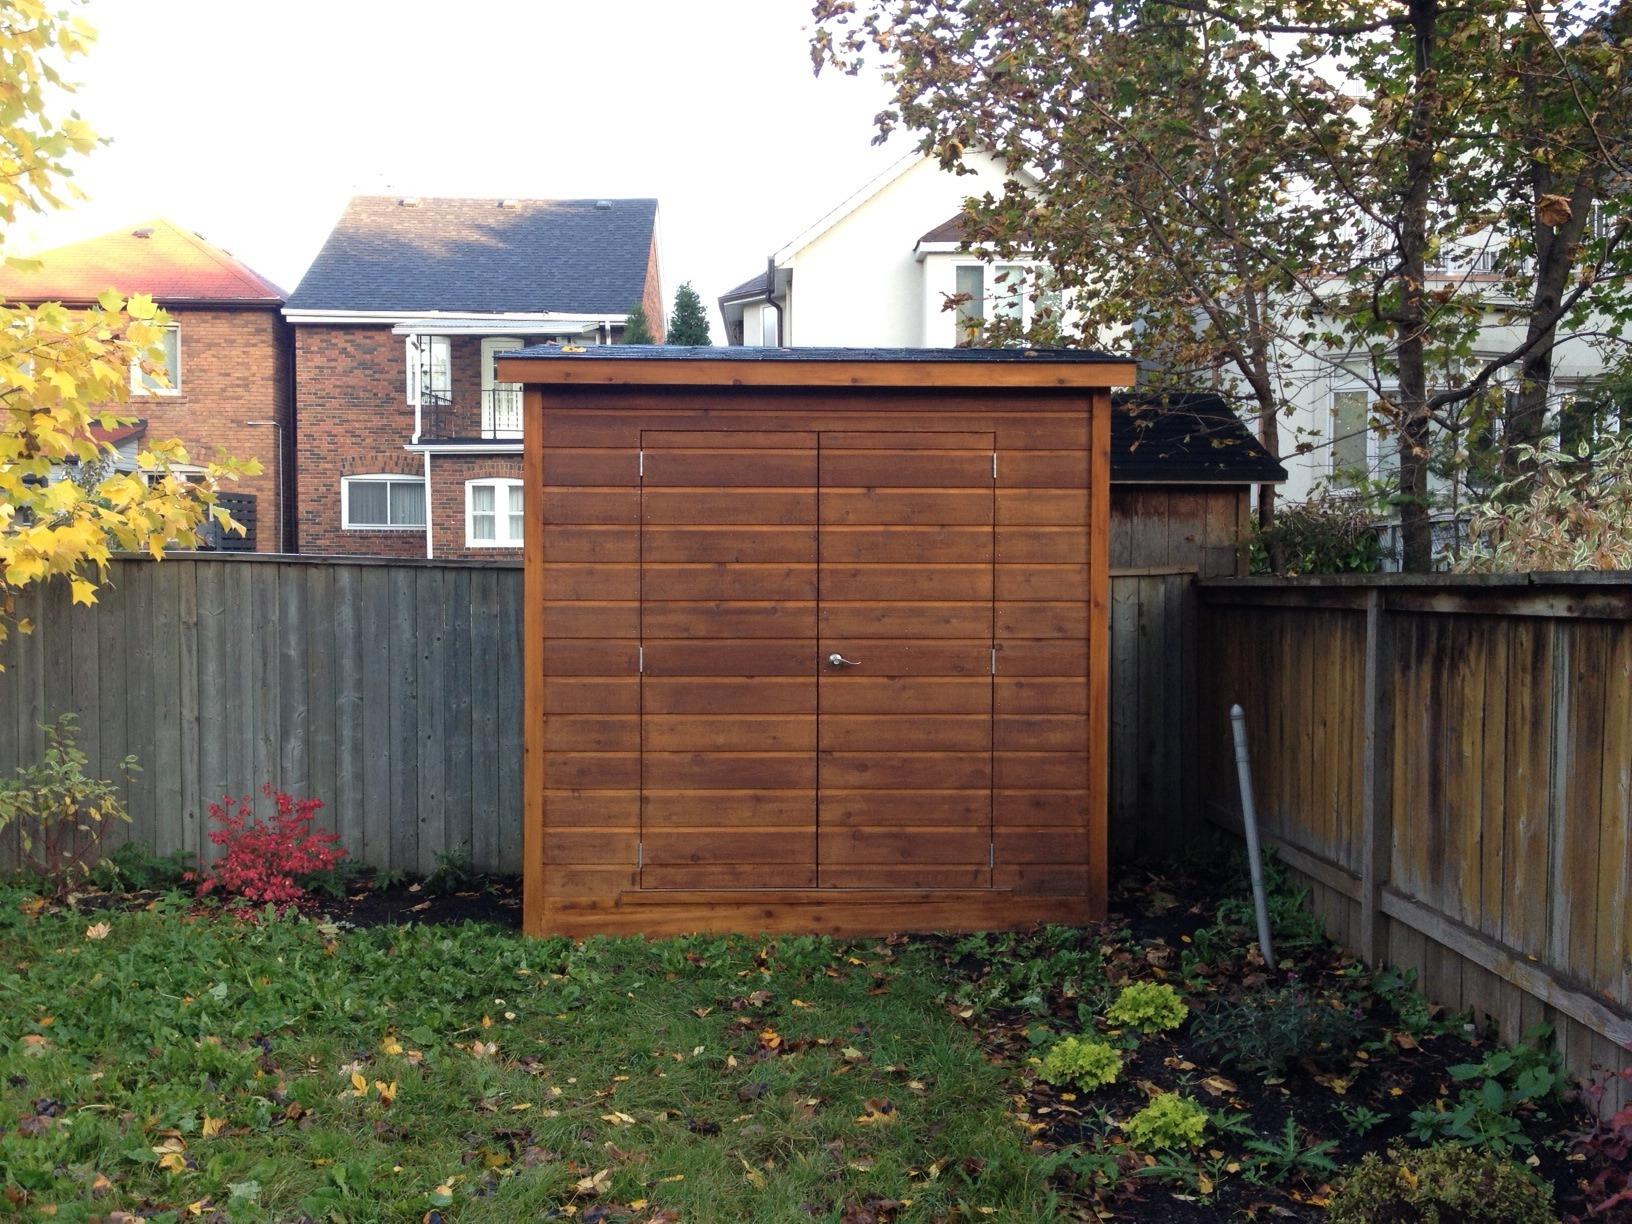 Cedar Sarawak shed 4x8 with concealed double doors in Toronto, Ontario. ID number 153236-1